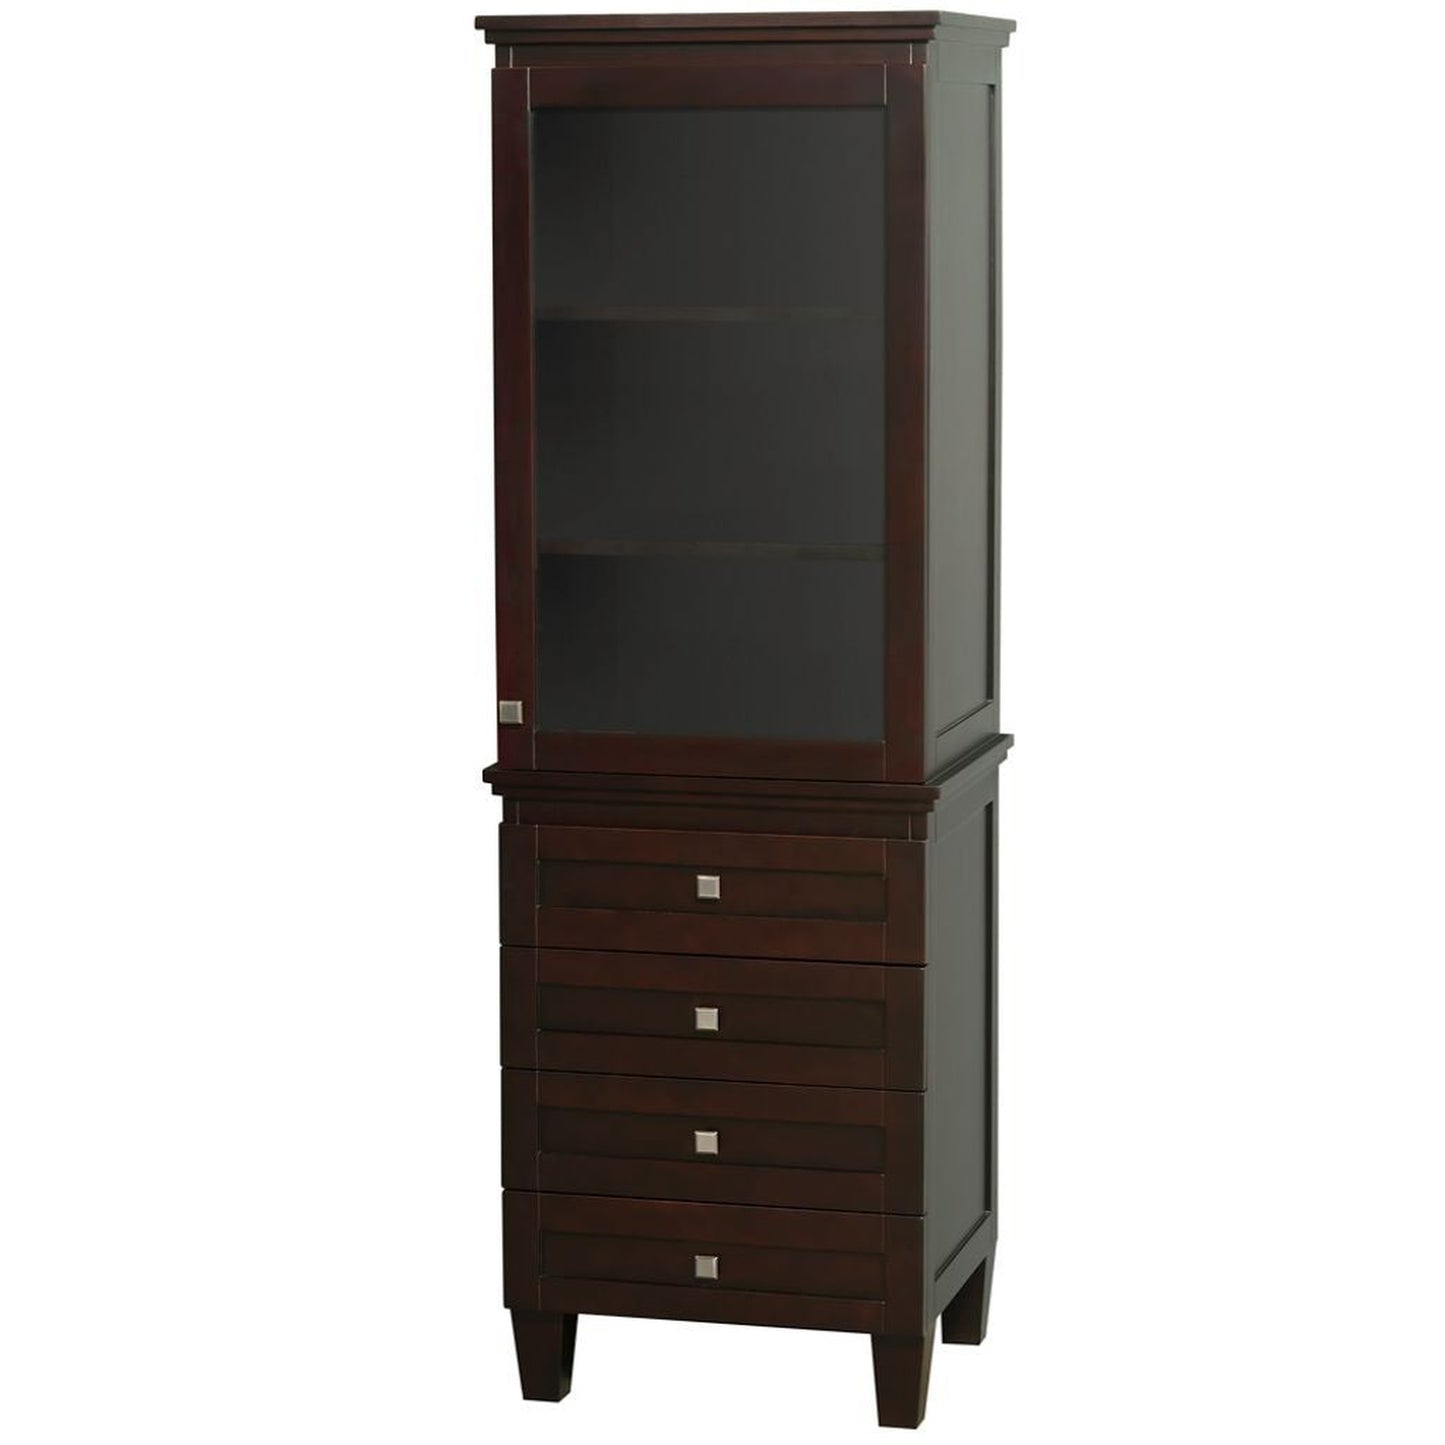 Wyndham Collection Acclaim Bathroom Linen Tower in Espresso with Shelved Cabinet Storage and 4 Drawers